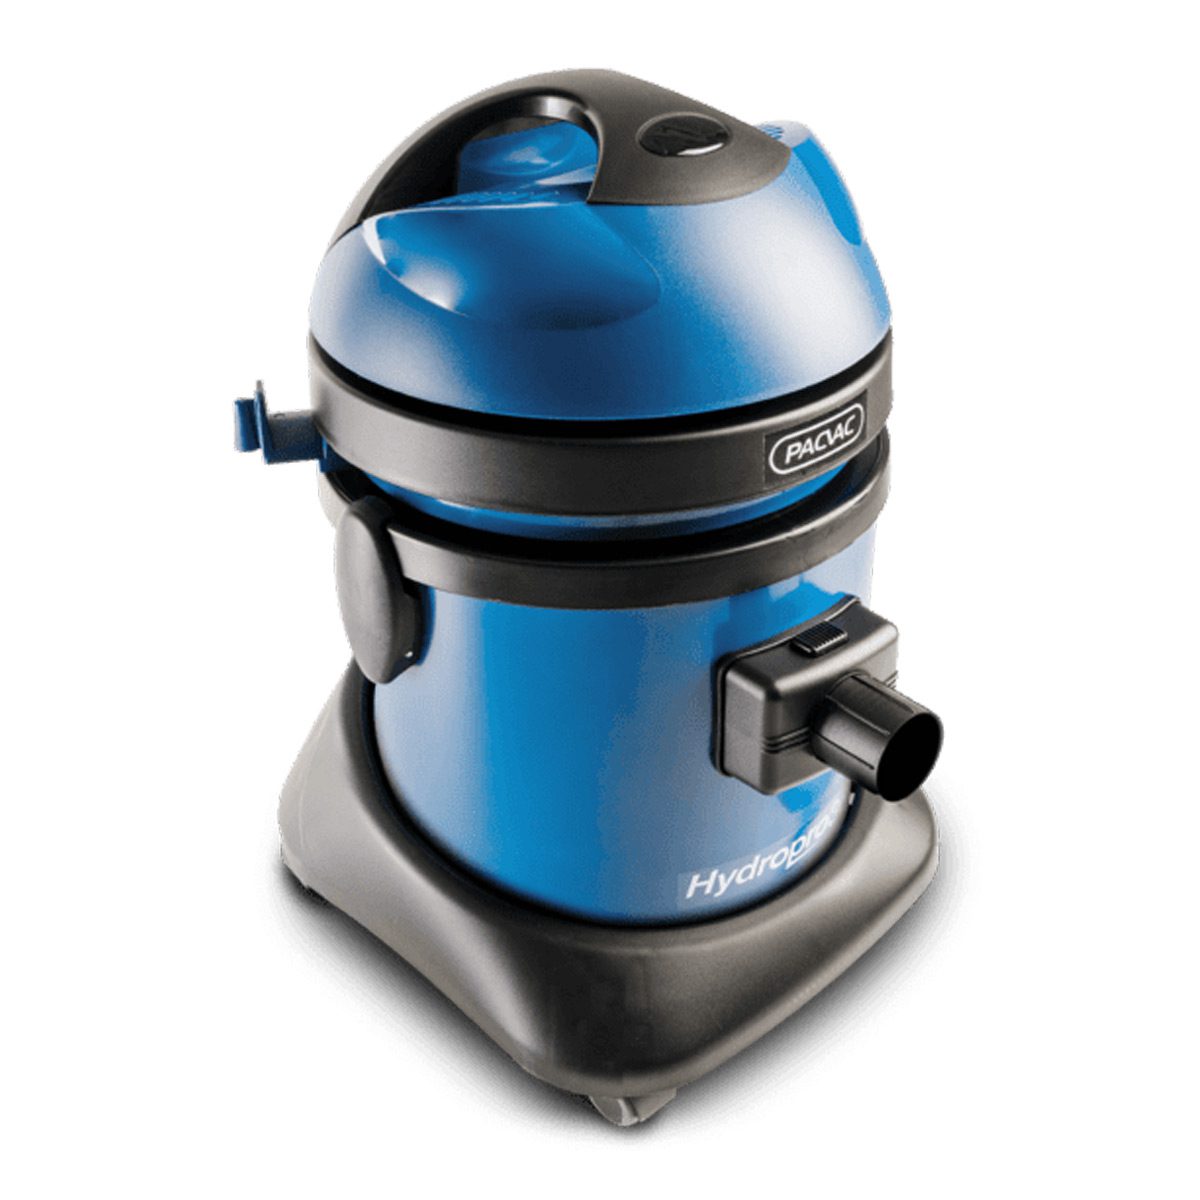 machinery-matting-vacuums-pacvac-hydropro-wet-and-dry-vacuum-cleaner-21L-litre-compact-wet-and-dry-vacuum-cleaner-waterproof-switches-non-marking-wheels -to-protect-floor-surfaces-vjs-distributors-E210S